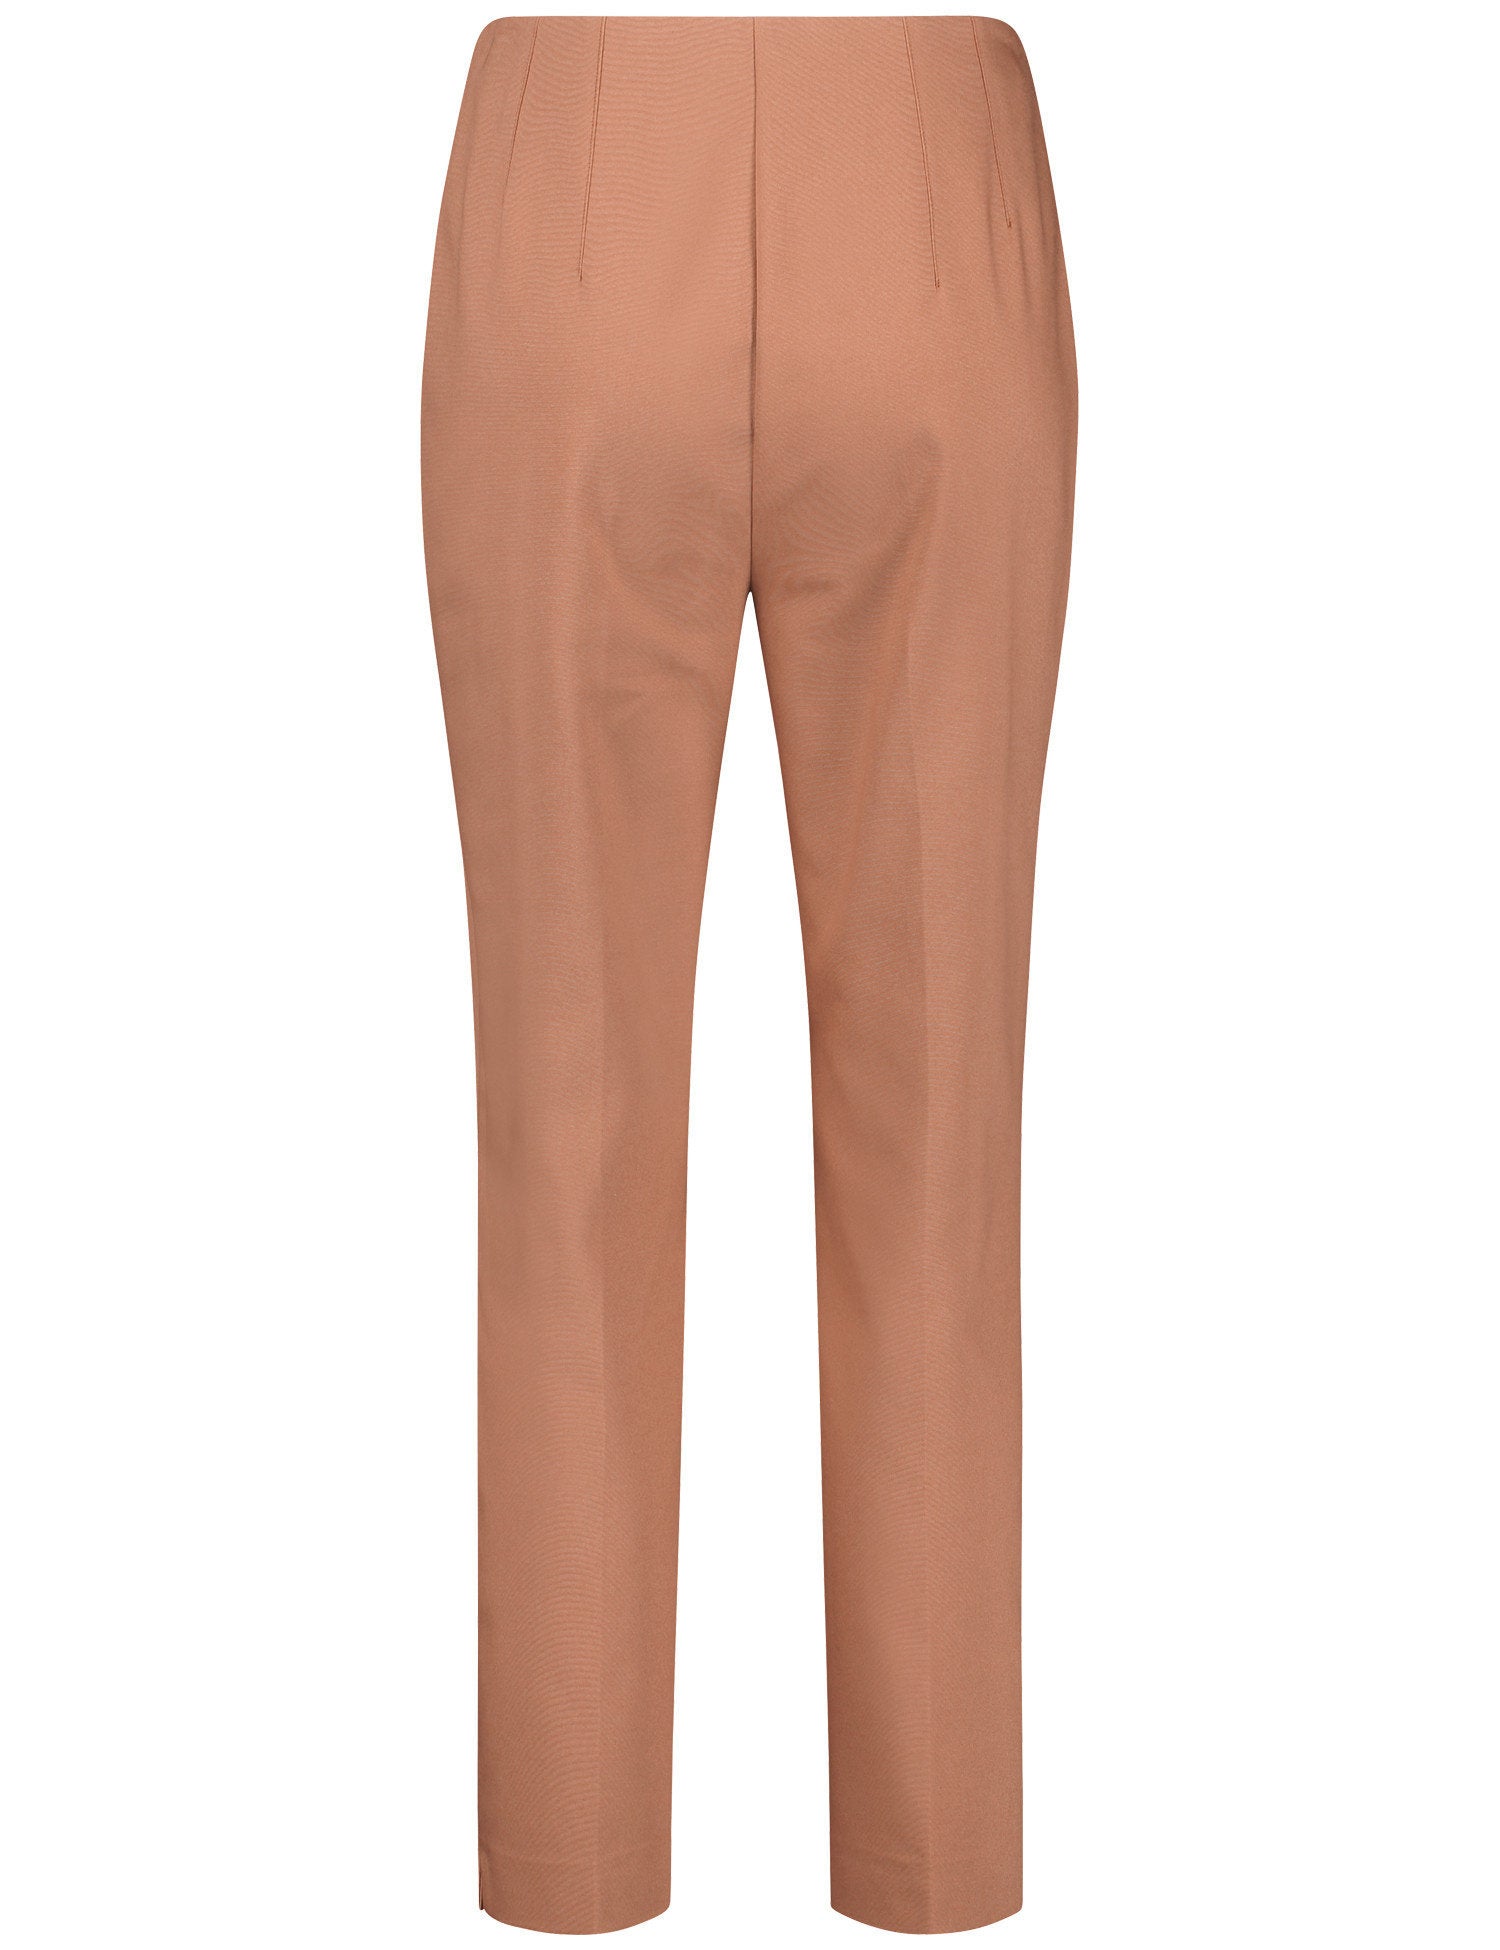 Trousers With Stretch For Comfort And Vertical Pintucks_320004-31334_70243_03